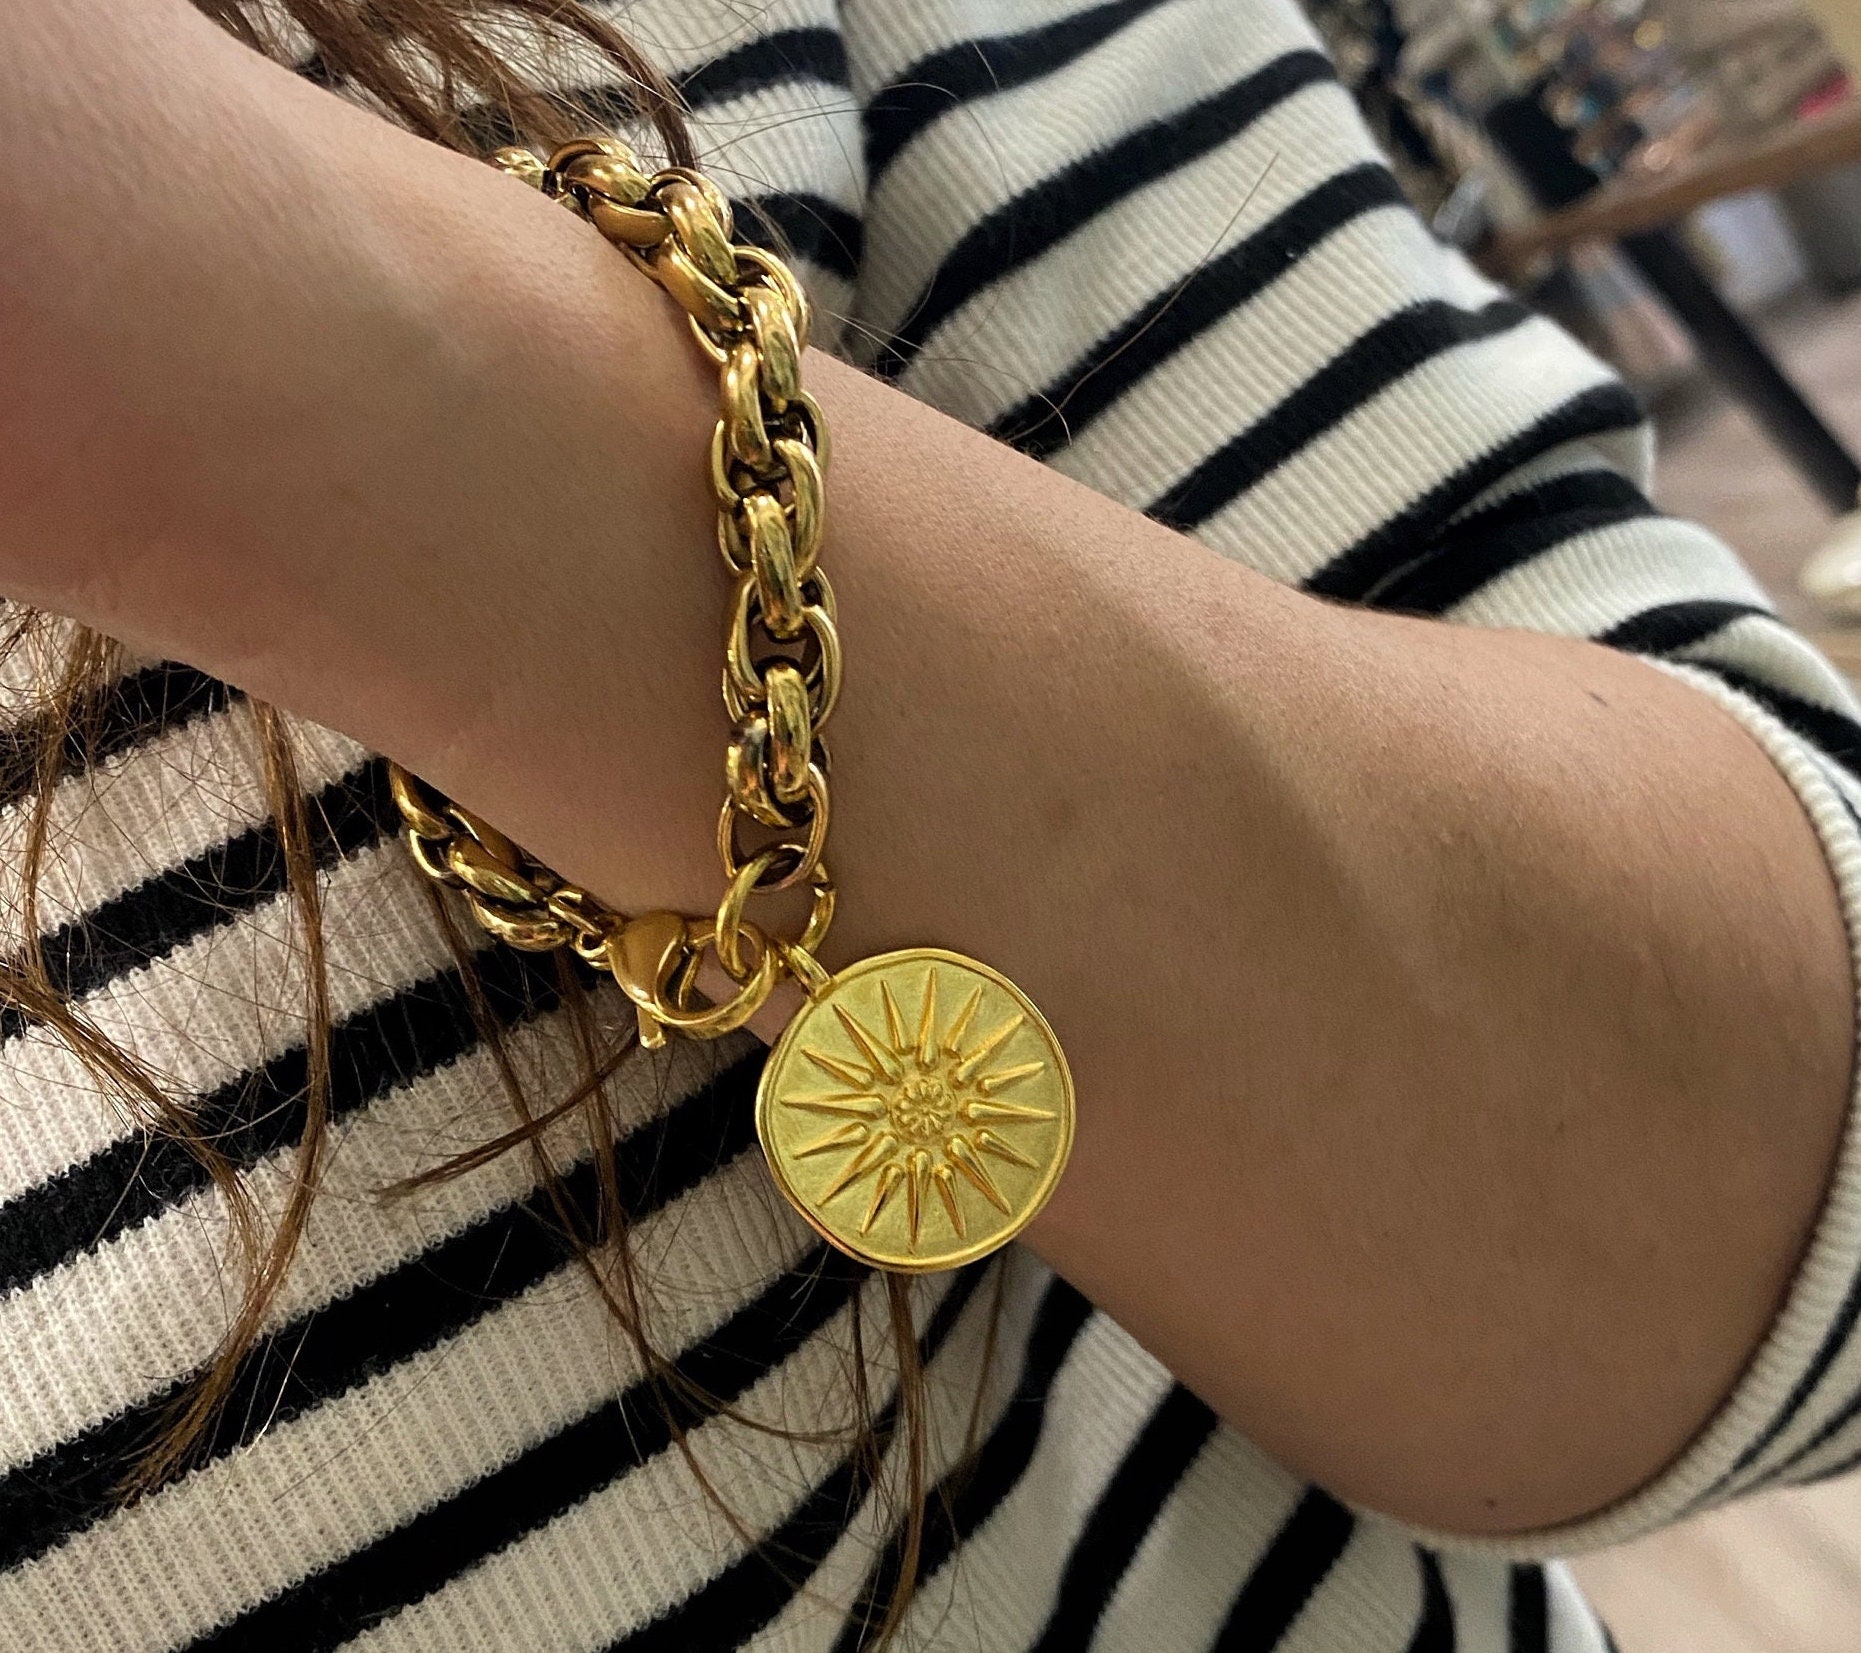 Buy Coin Bracelet, Chunky Gold Tone Bracelet, Large Coin Bracelet, Retro  Style Bracelet, Greek Coin Jewelry, Everyday Jewelry, Large Coin Charm  Online in India - Etsy